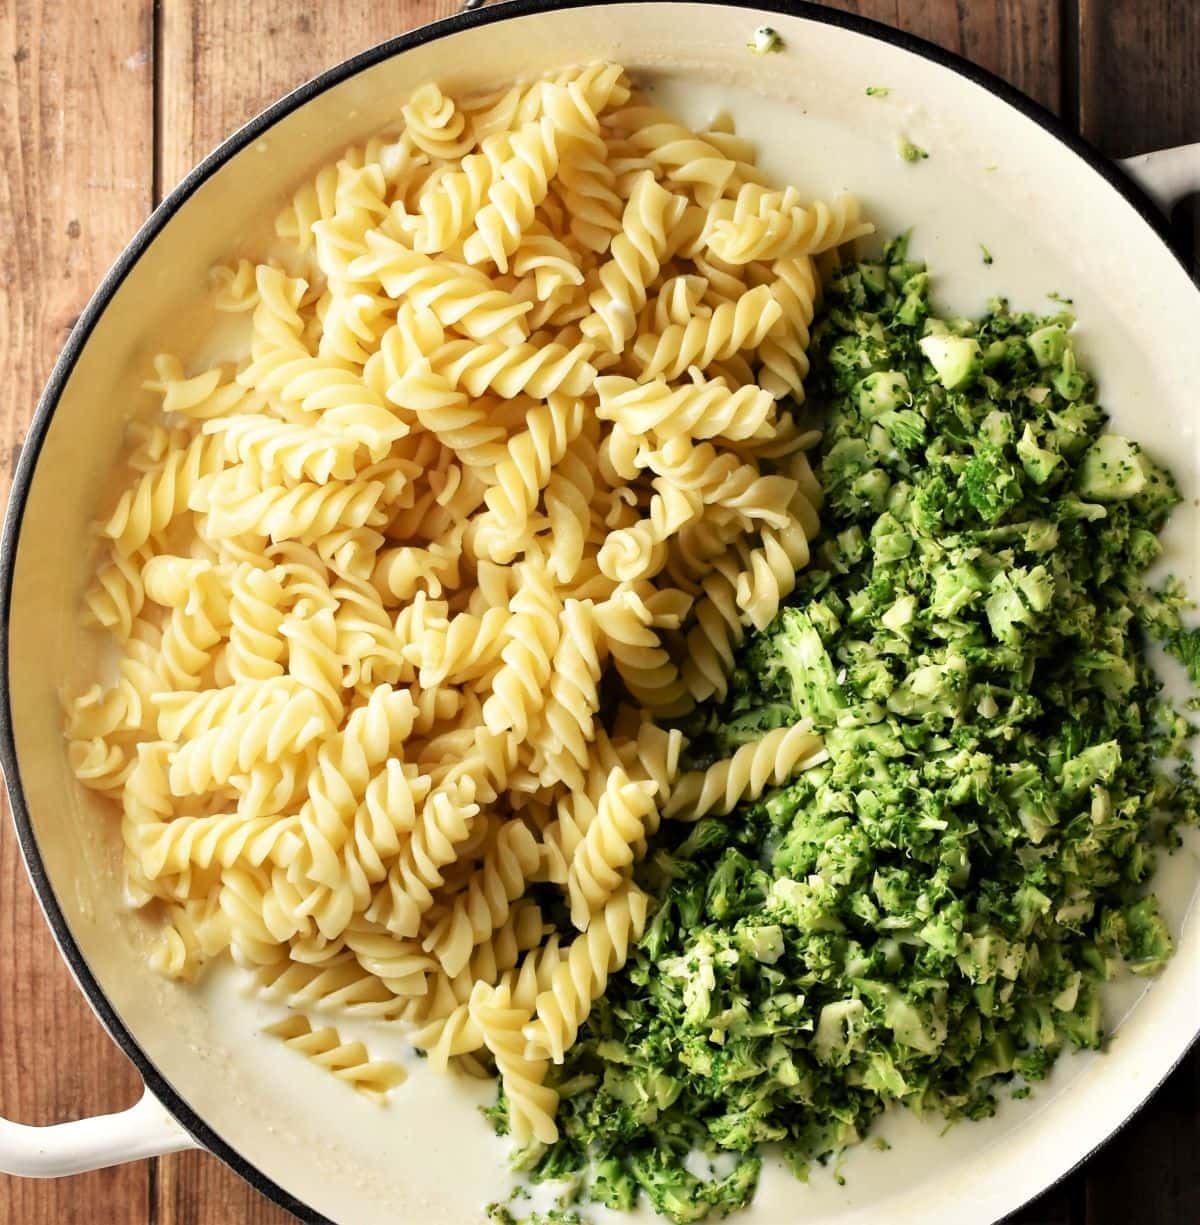 Fusilli pasta and broccoli rice in large shallow pan.